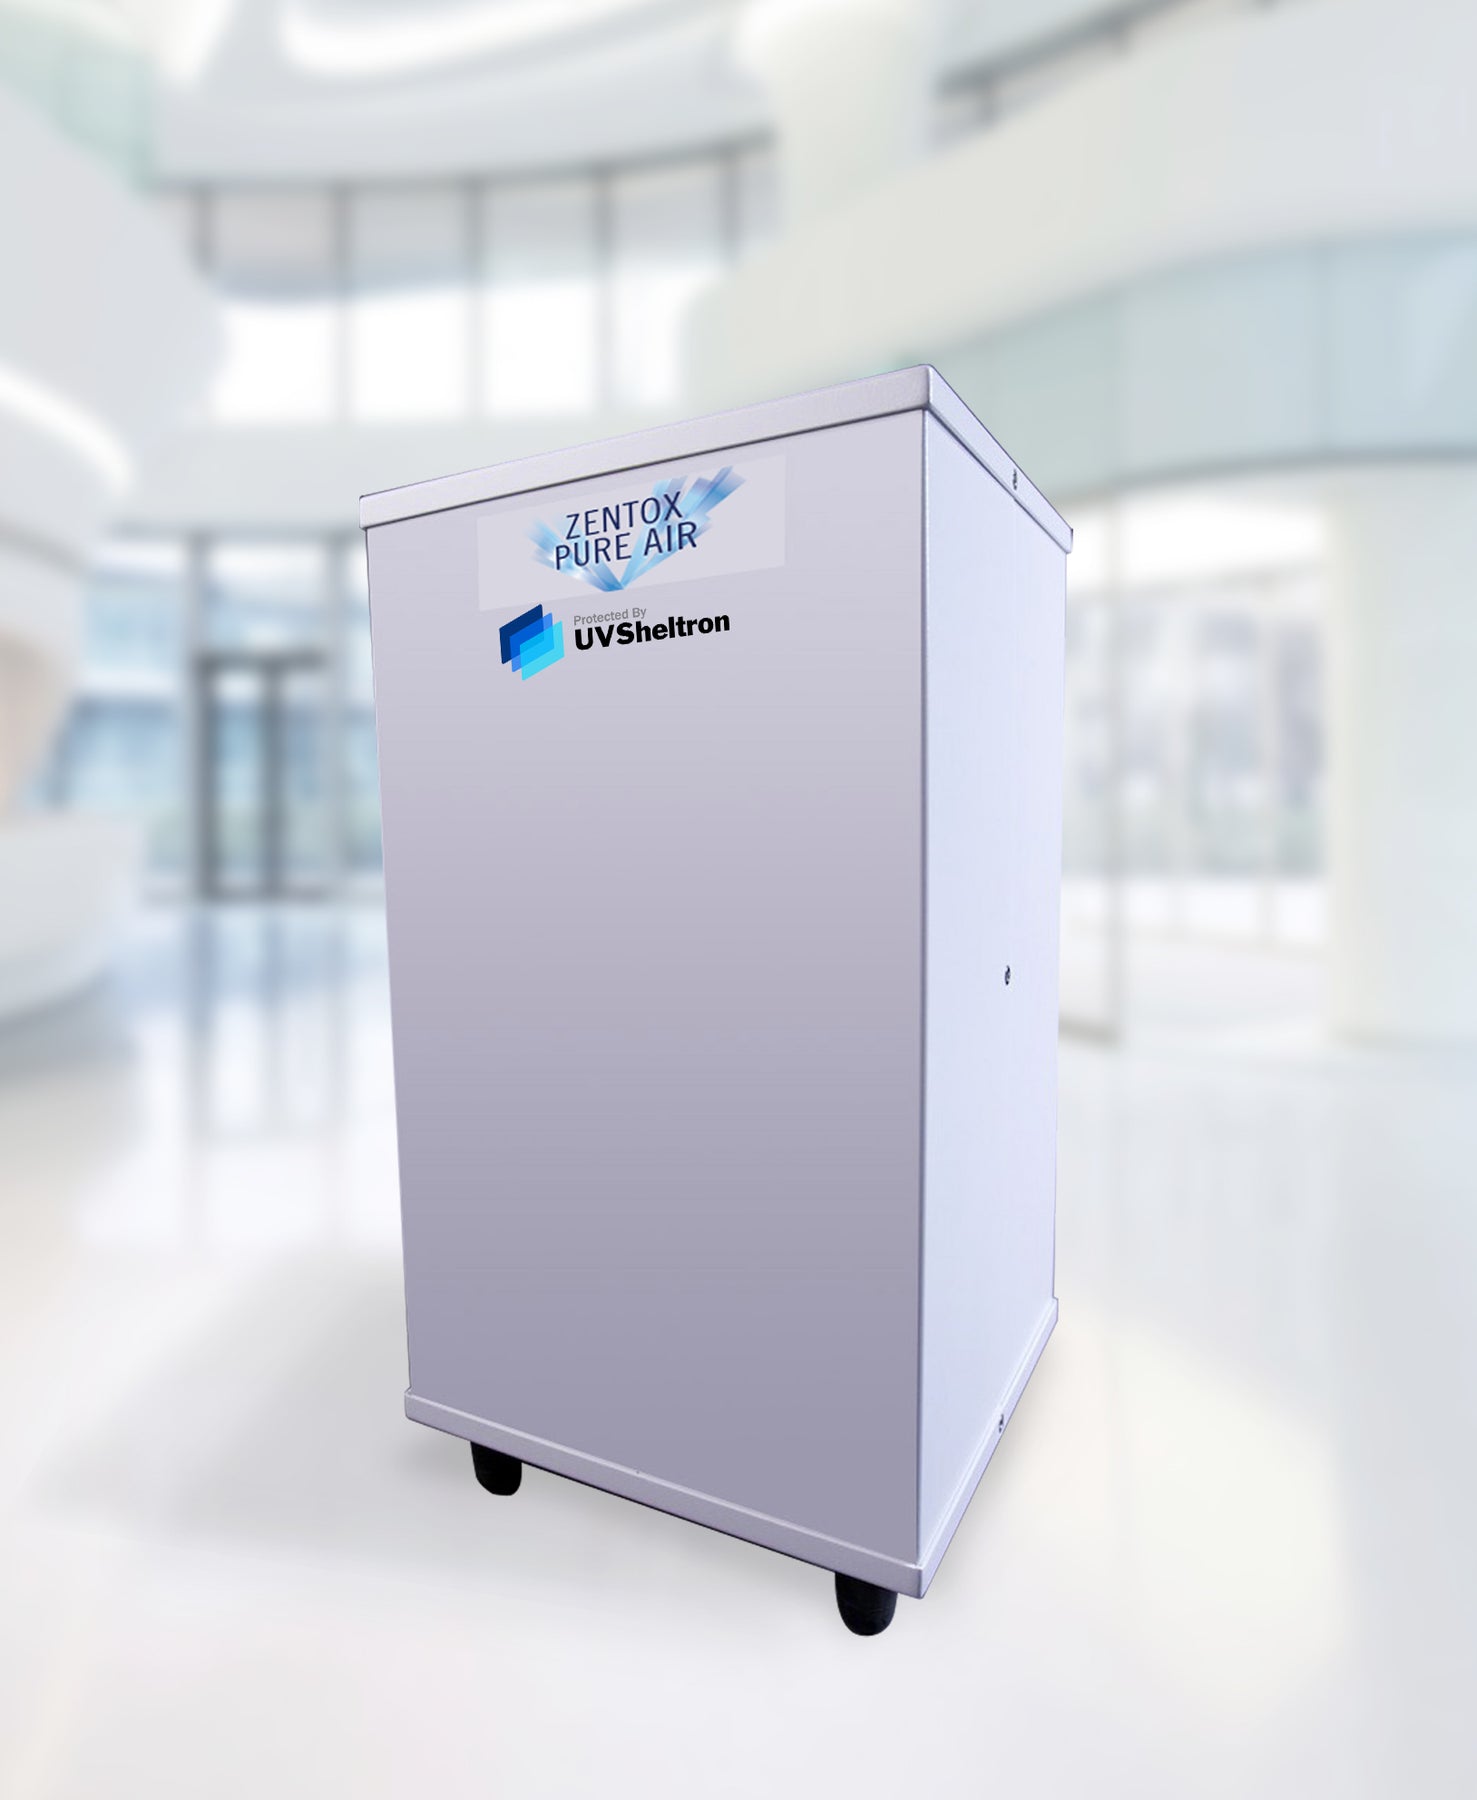 Buy Pure Air 200 Purification Systems Online | Pure Air Purification Systems for | UV Shelton – UVSheltron